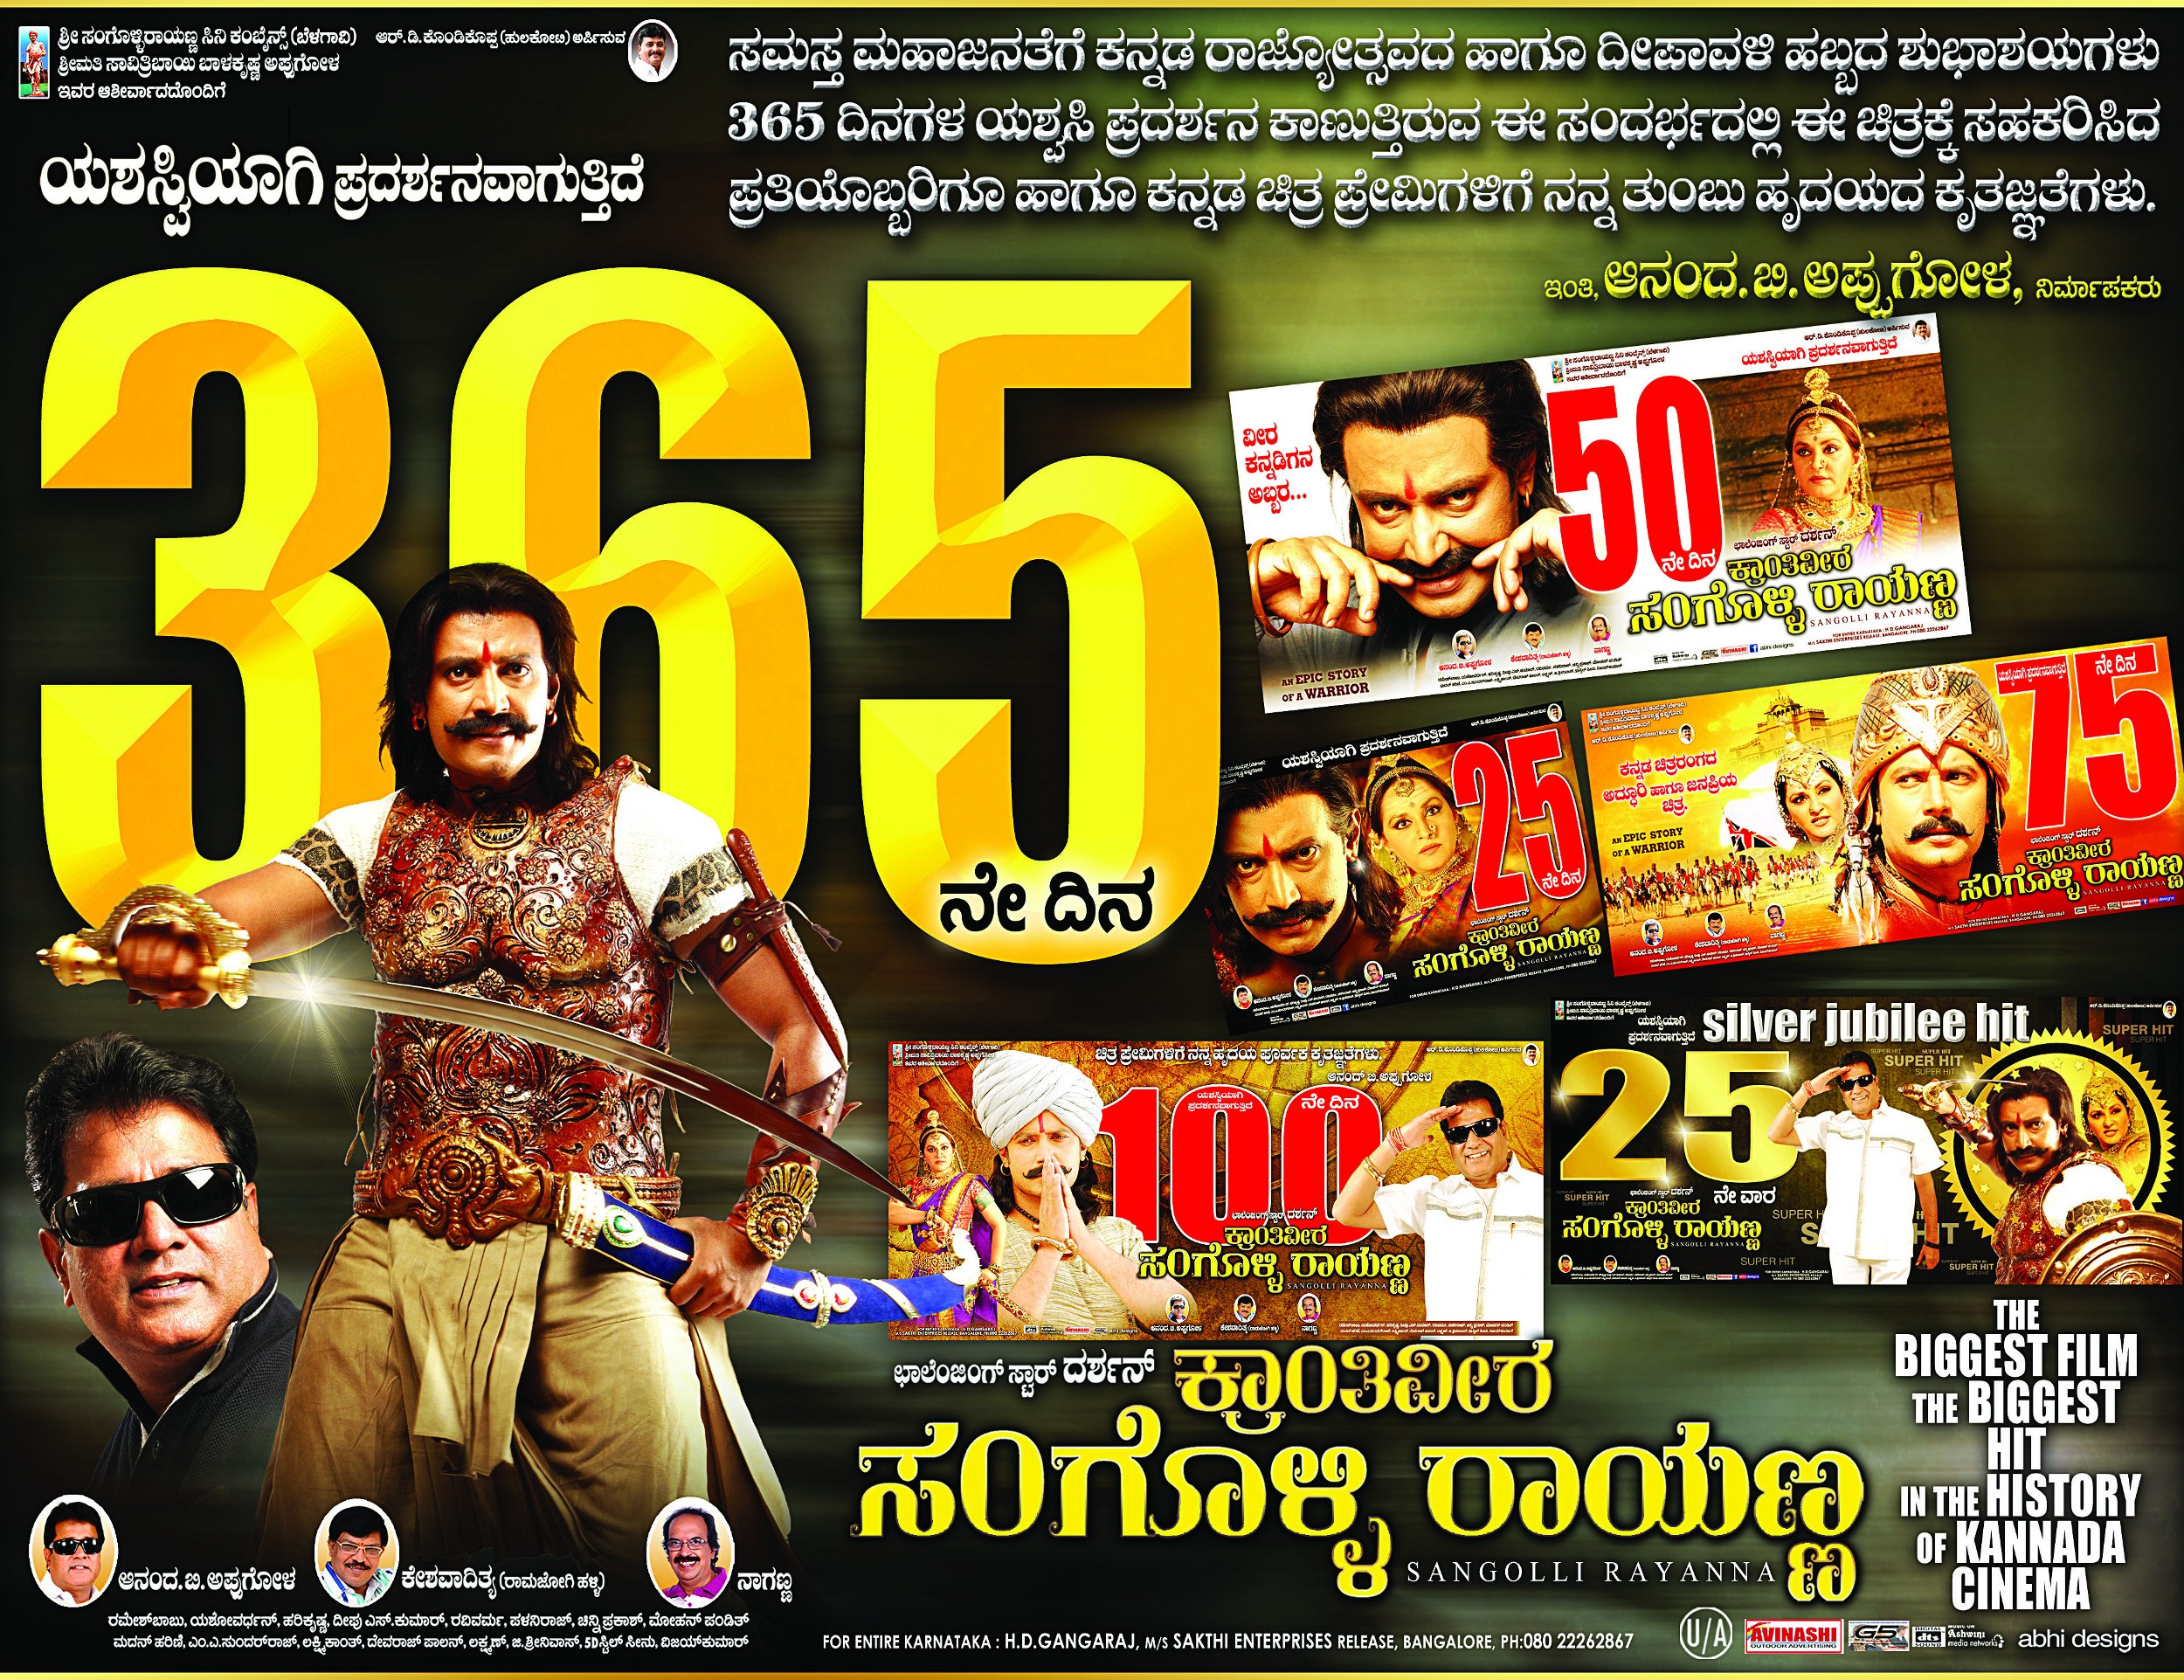 Mega Sized Movie Poster Image for Sangolli Rayanna (#77 of 79)